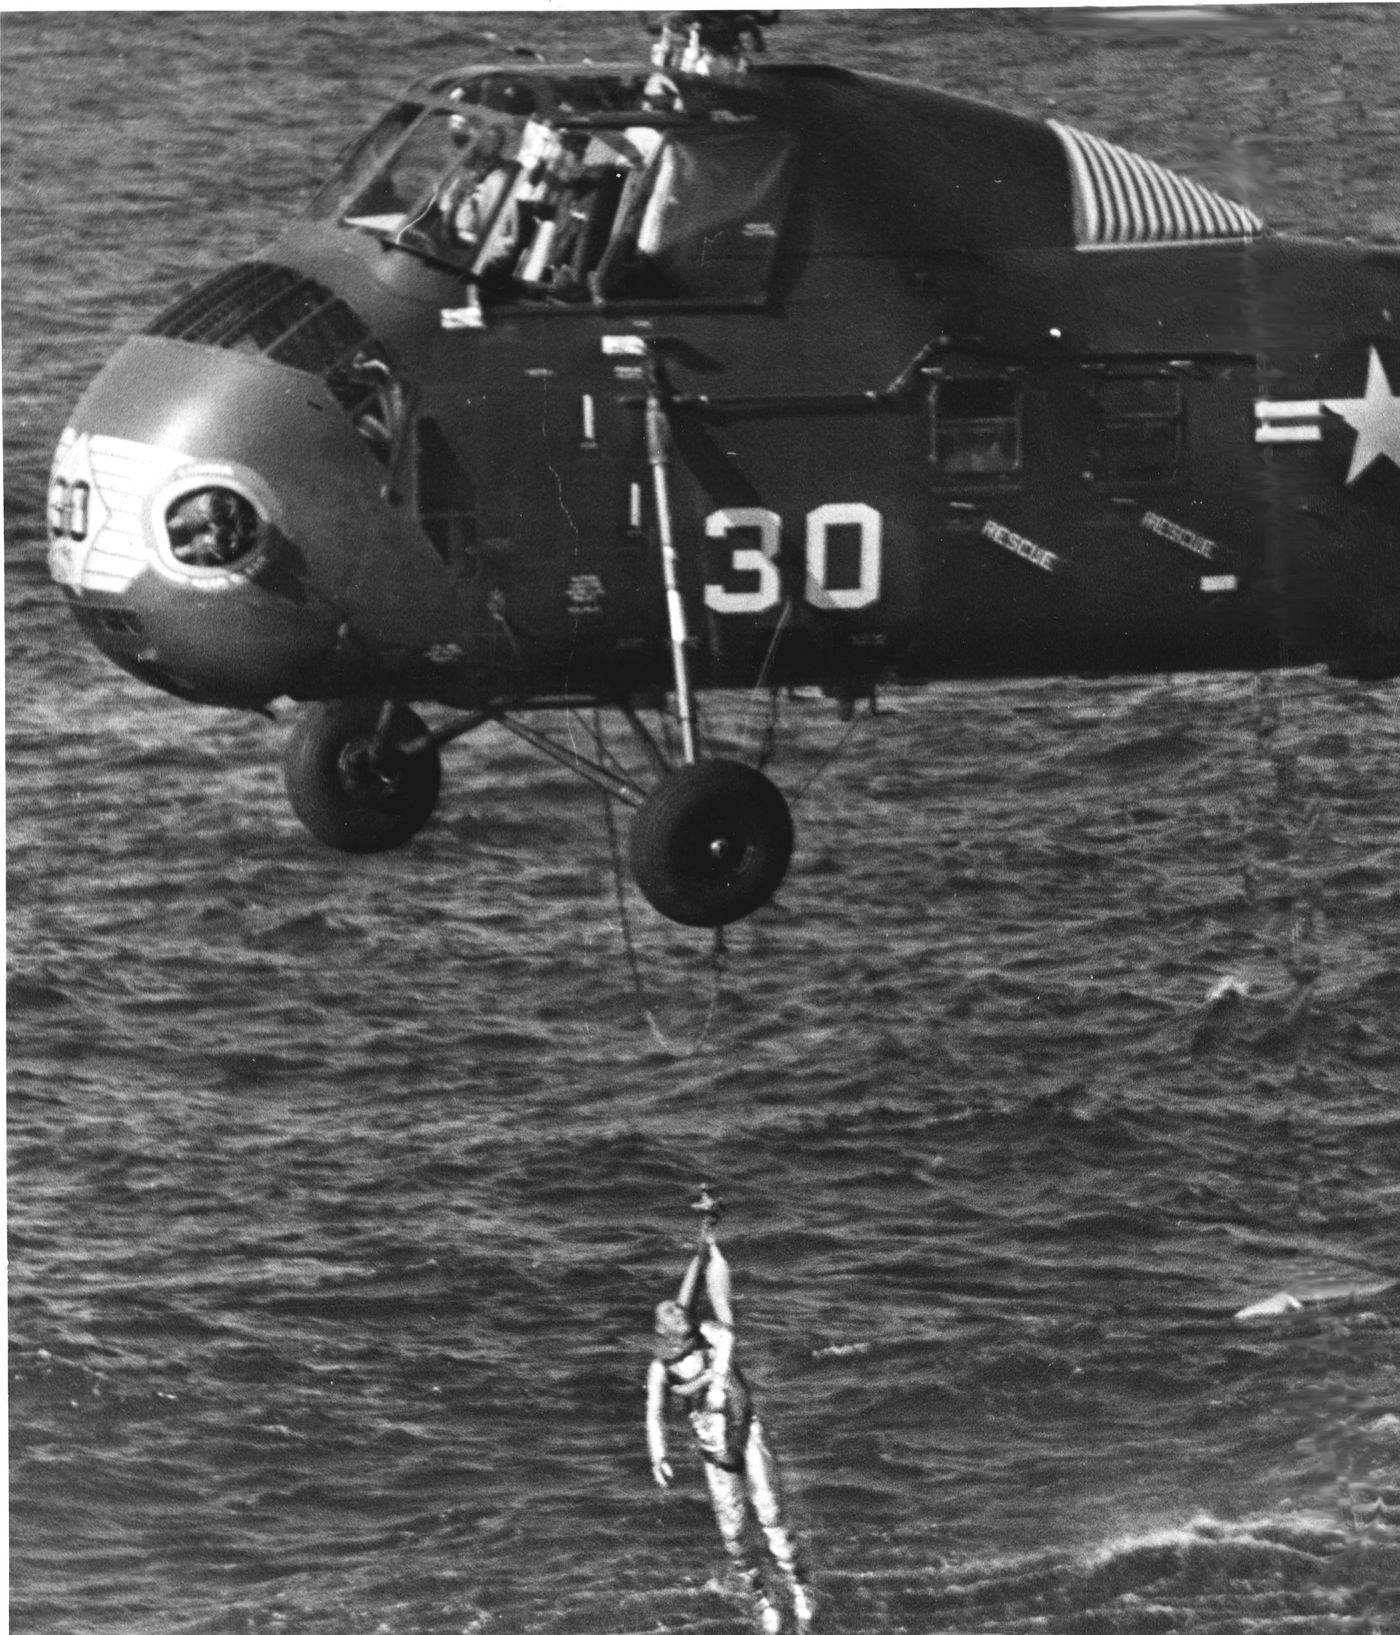 Grissom being carried to safety after his capsule sank to the bottom of the Atlantic Ocean. (Credit: NASA)